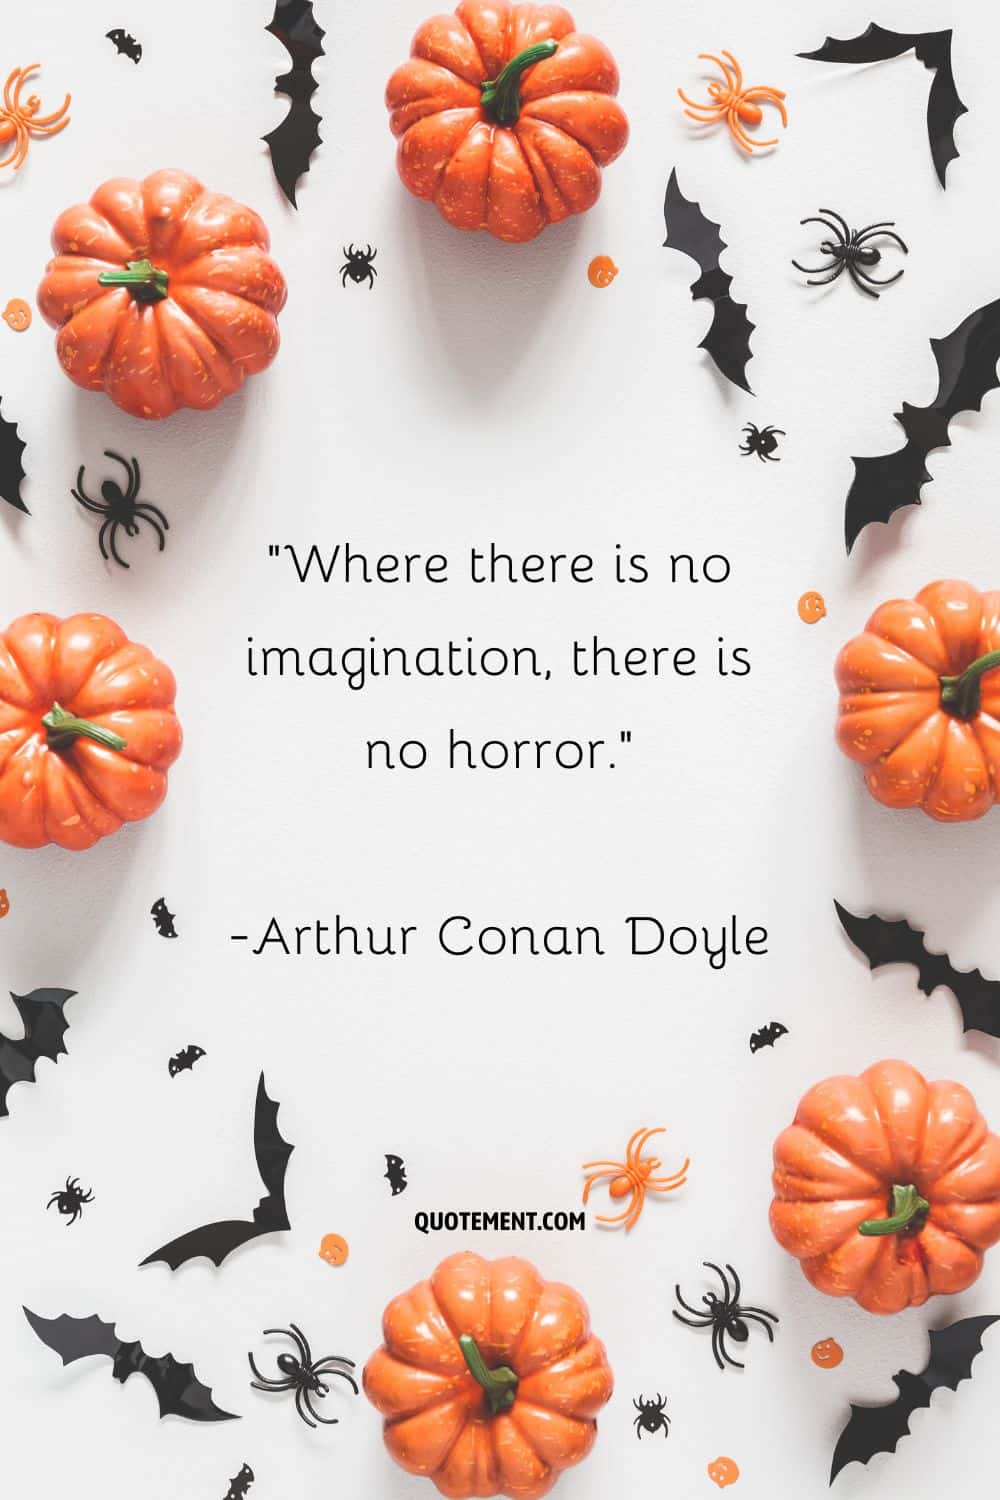 Where there is no imagination, there is no horror